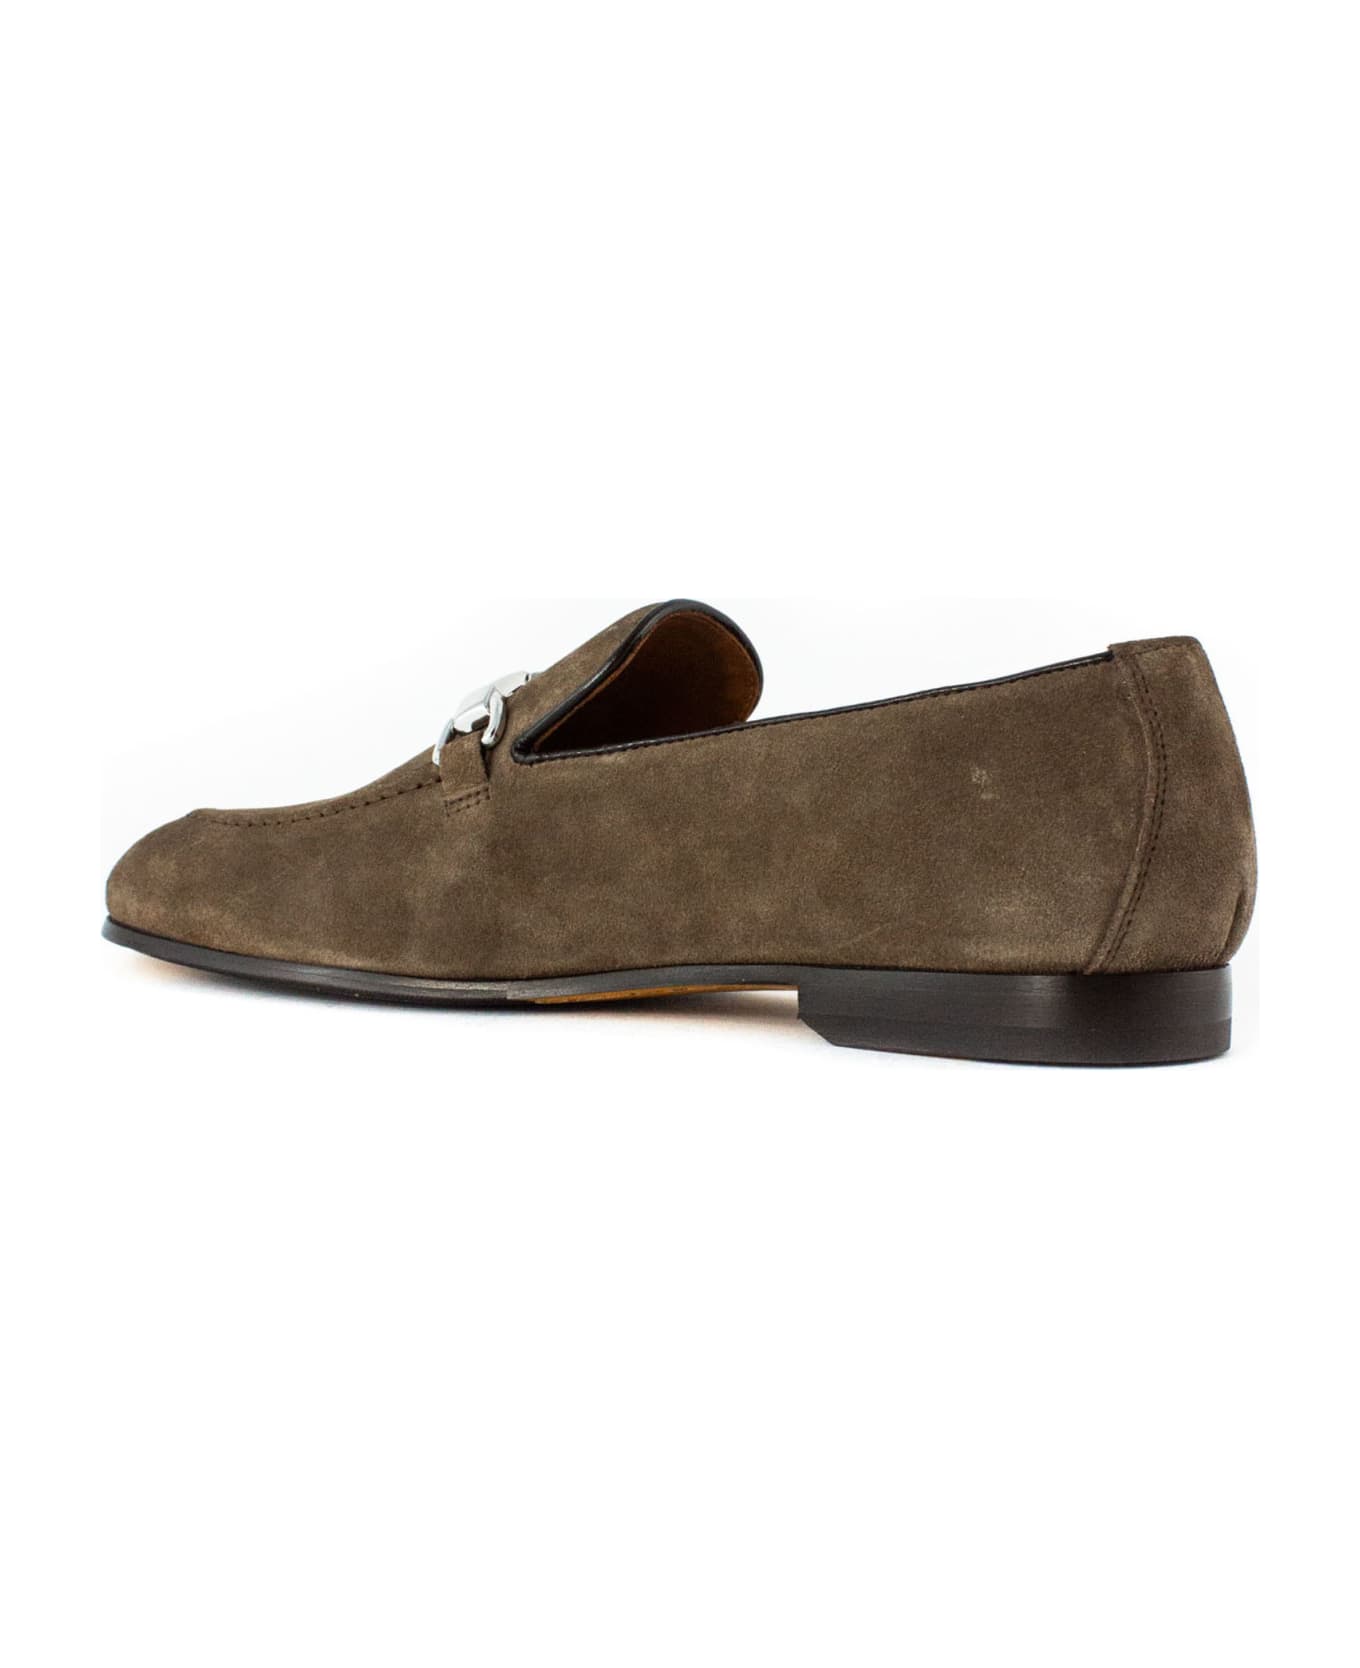 Doucal's Brown Suede Leather Loafer - Brown